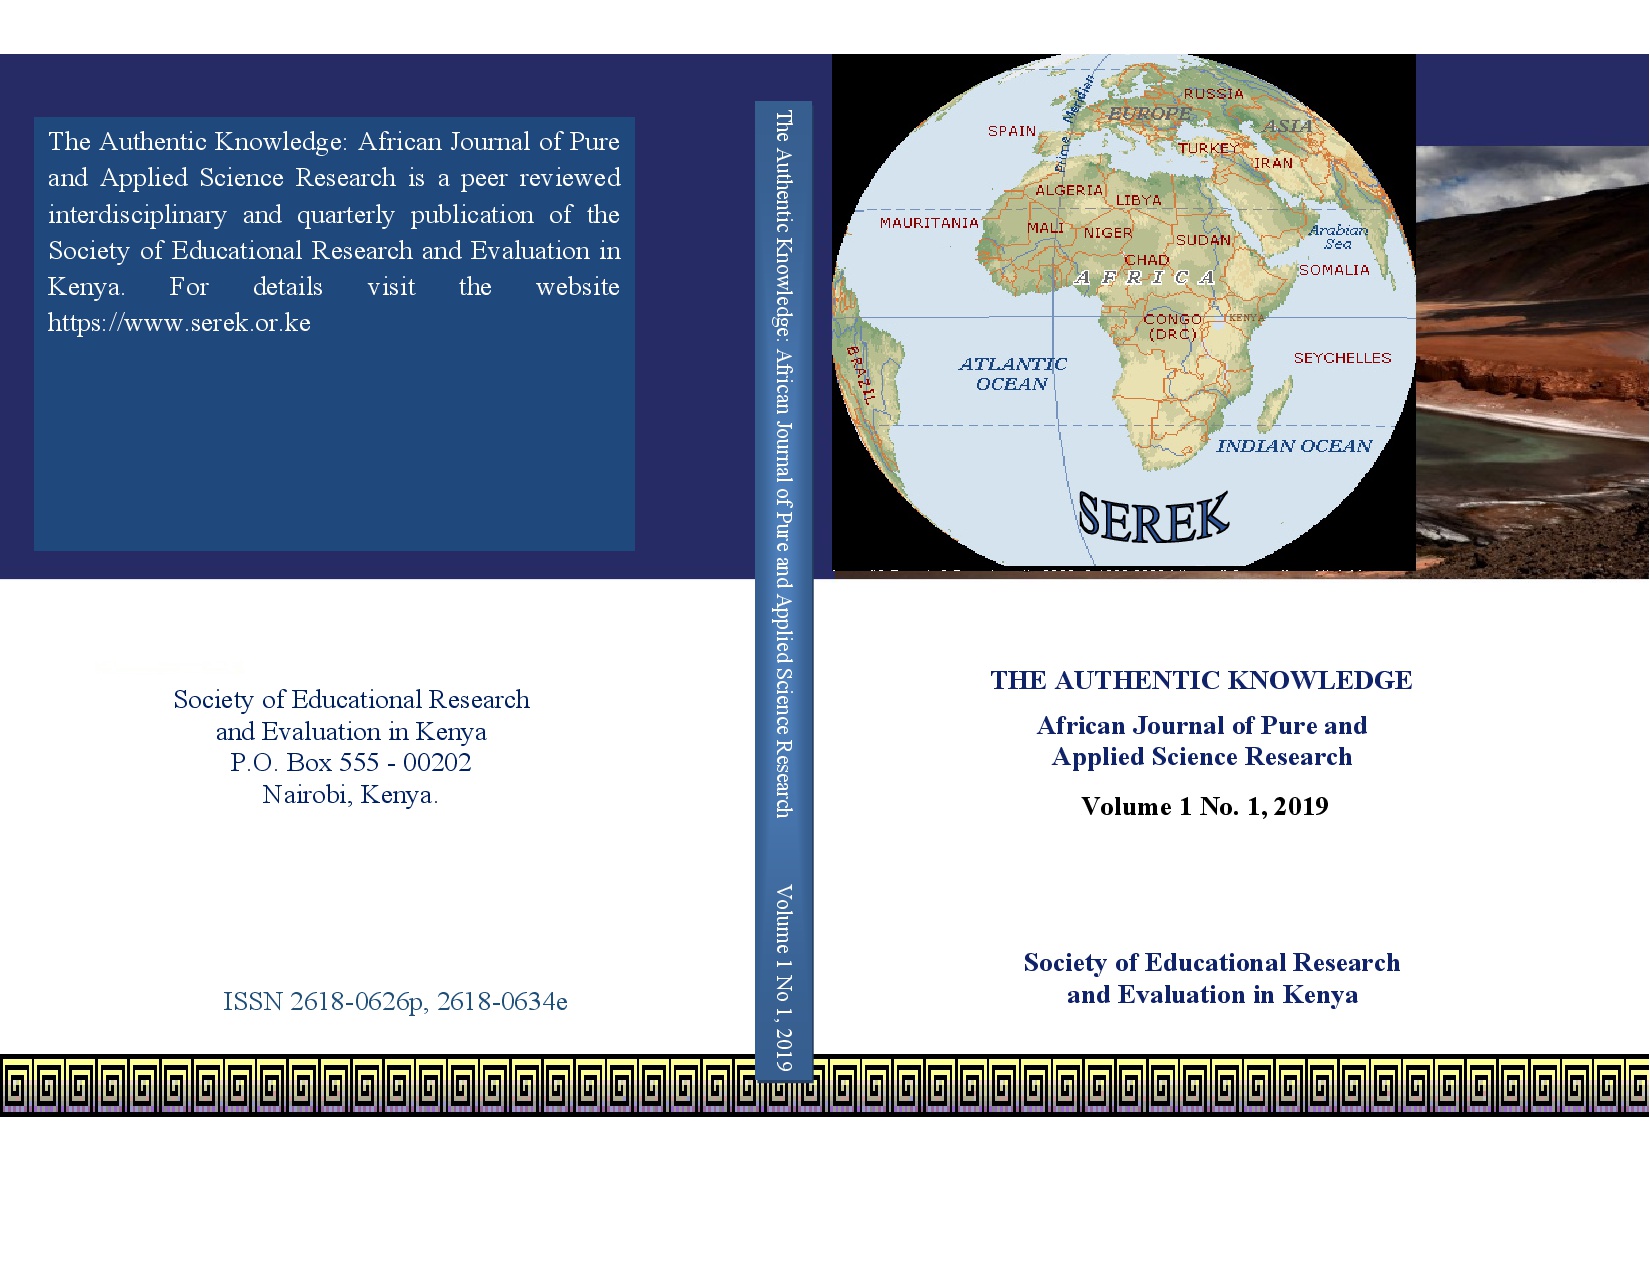 The Authentic Knowledge: African Journal of Pure and Applied Sceince Research